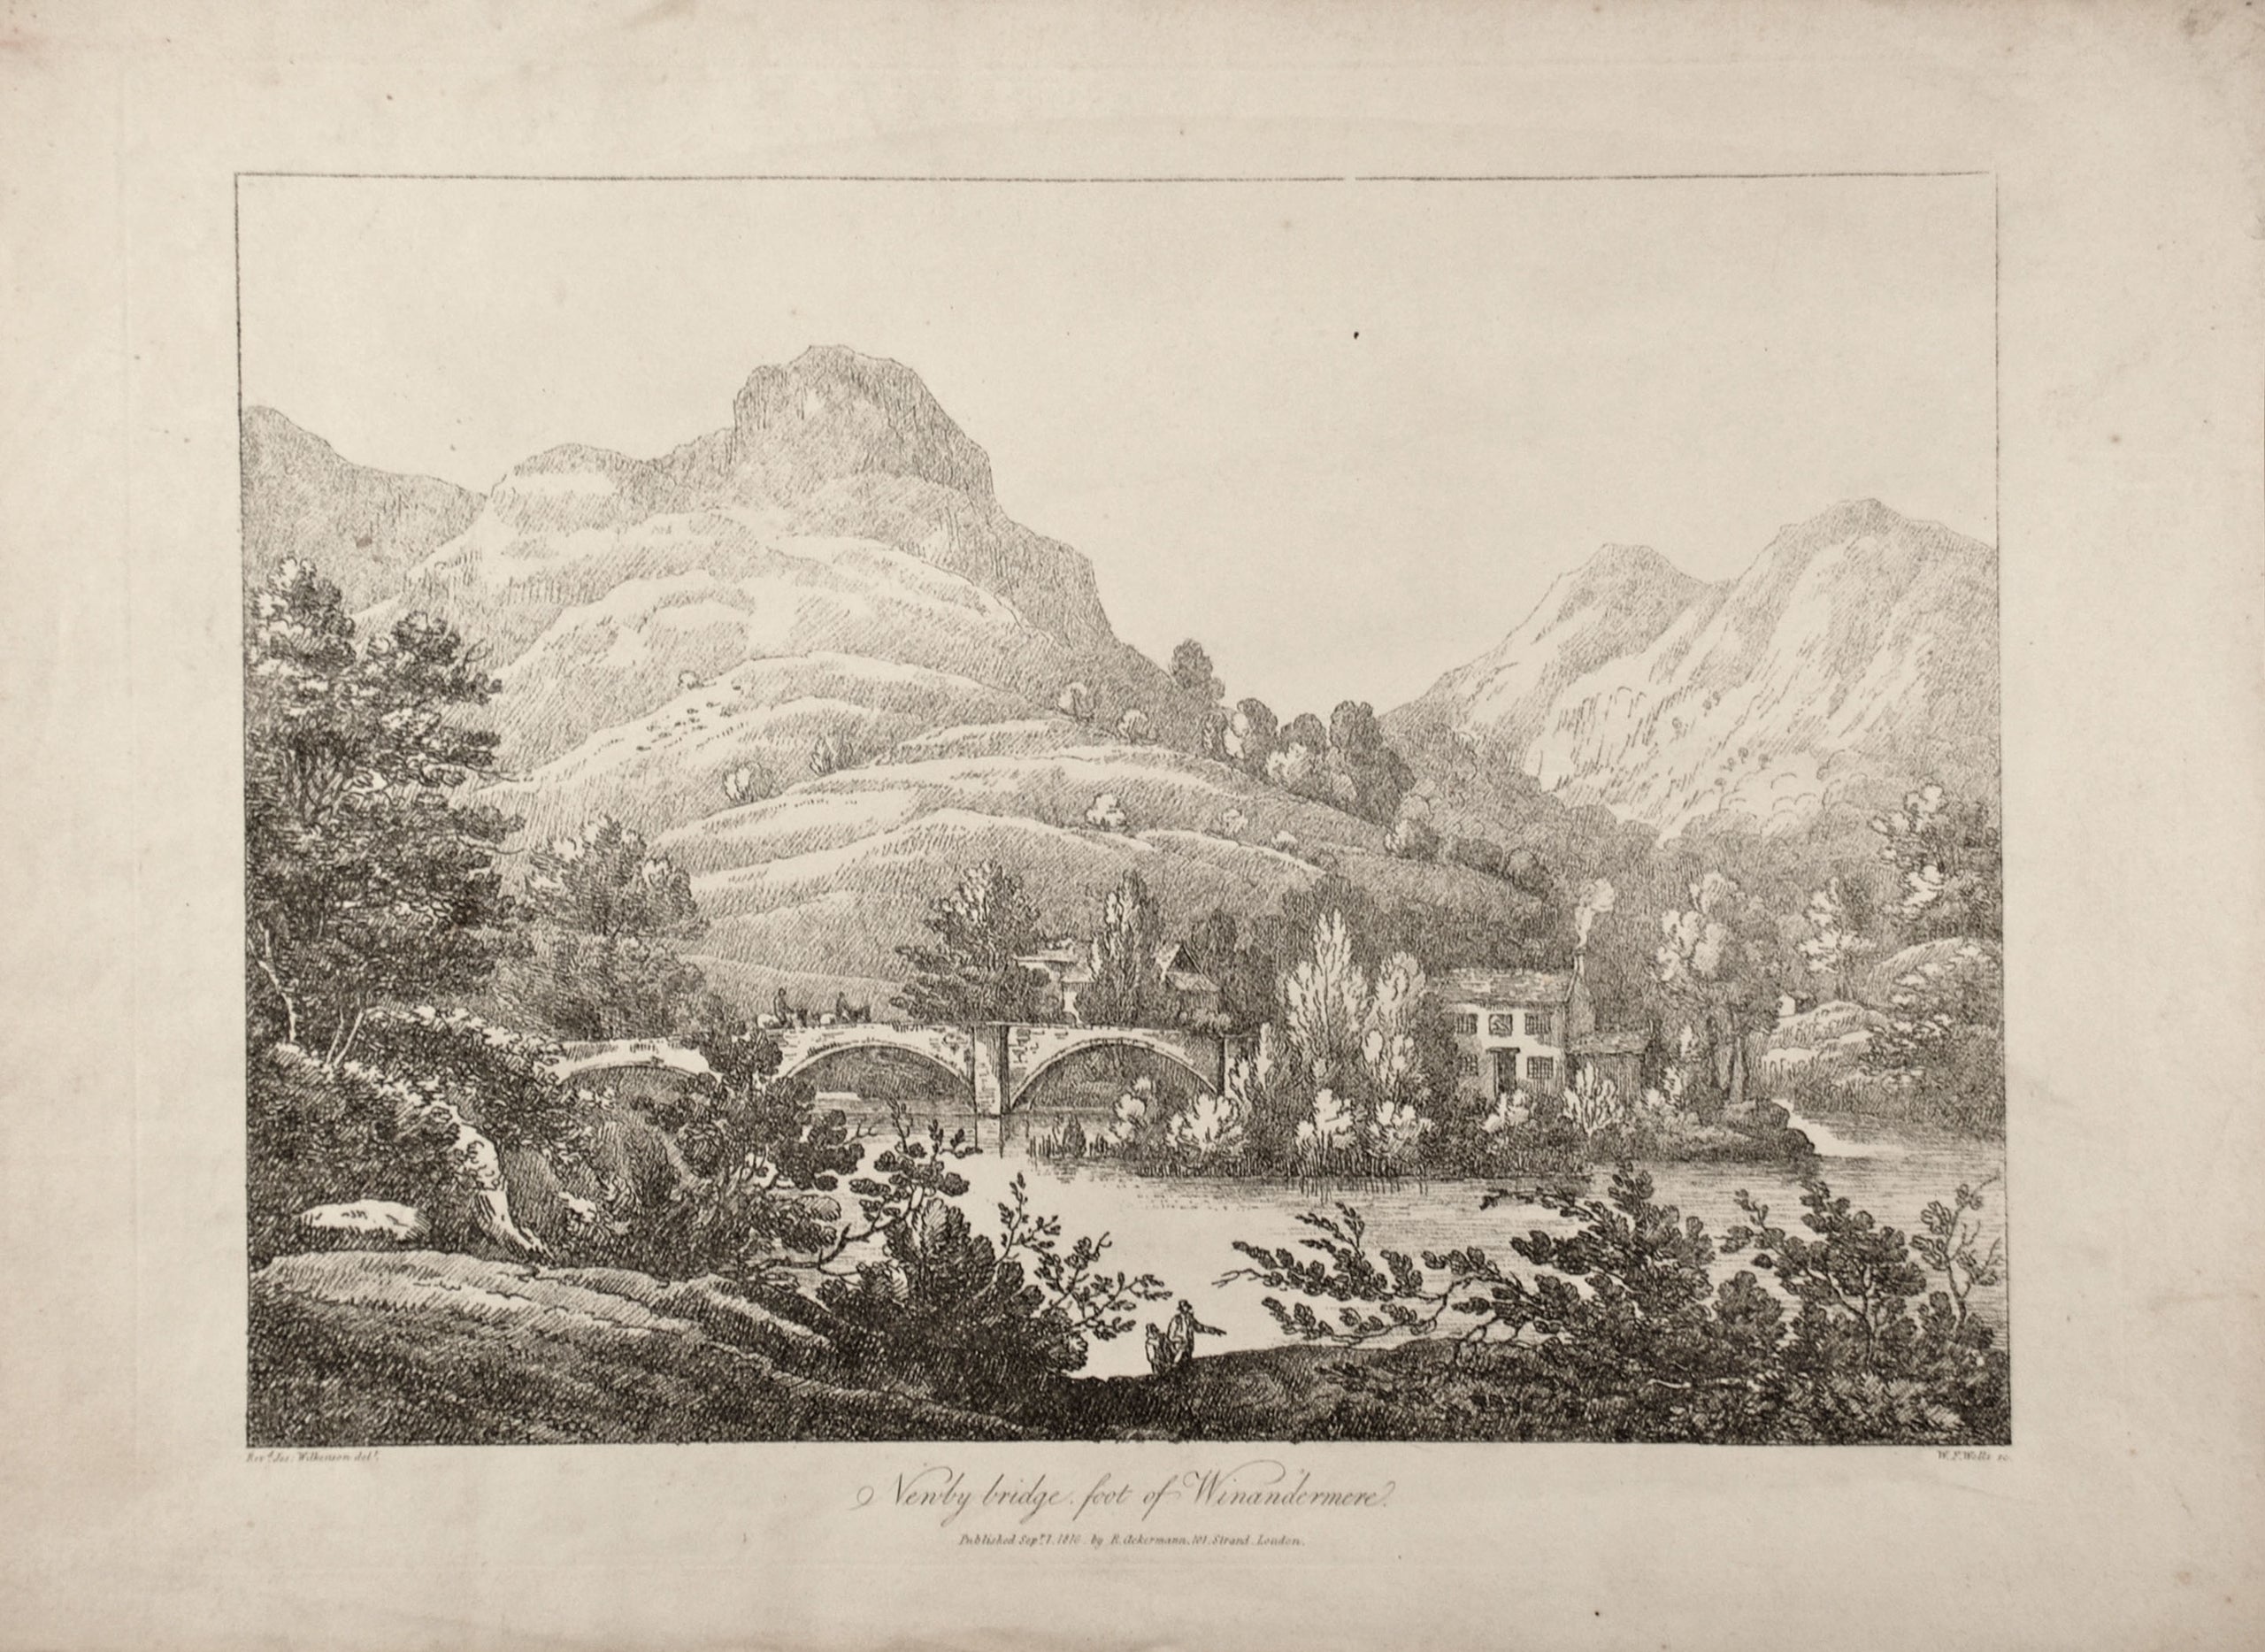 Newby Bridge Foot of Winandermere, 1810, Soft Ground Etching For Sale